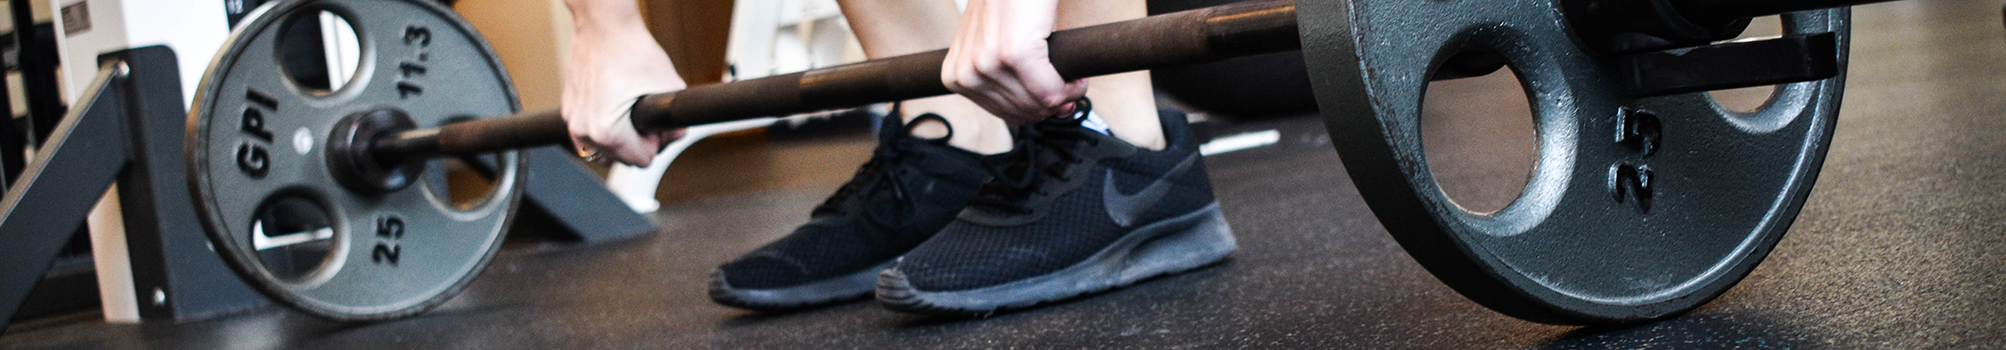 The shoes of a student is shown on the Fitness Center floor between the weights on a dumbbell before it is lifted off the floor. 